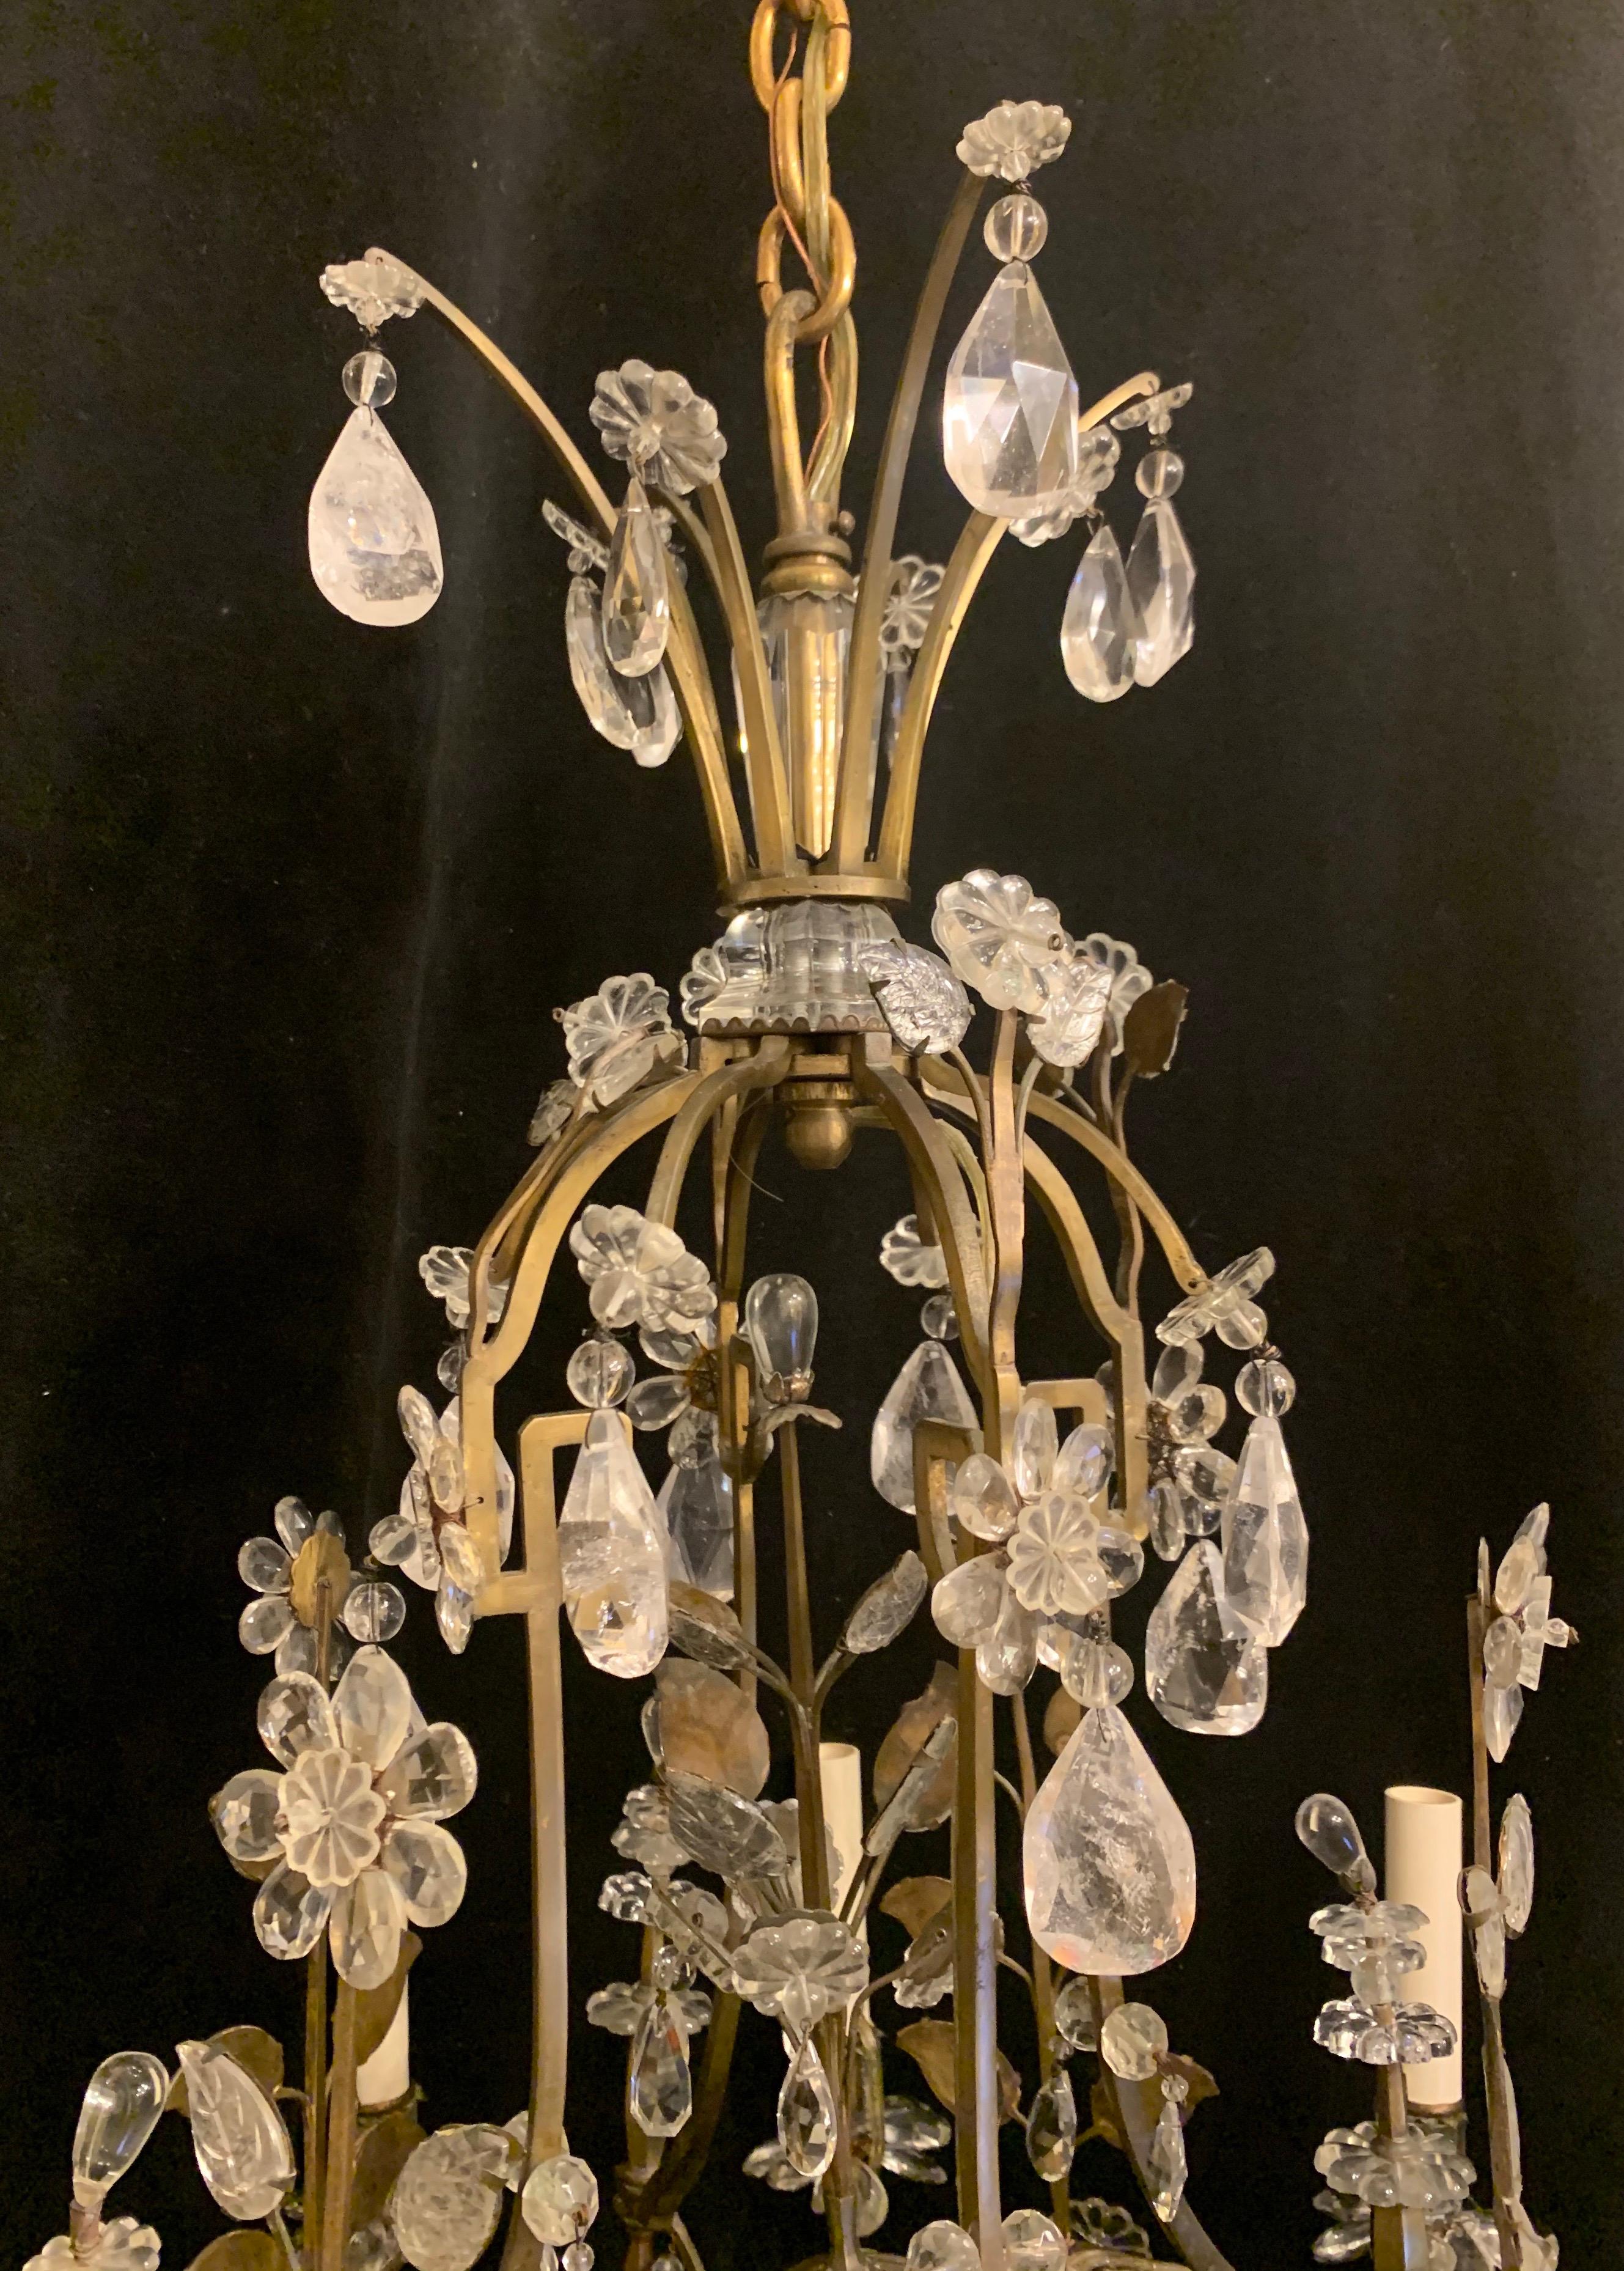 A wonderful bronze and rock crystal beaded basket center, and free standing flower Maison Baguès chandelier, rewired and accompanied by chain canopy and mounting hardware for installation.